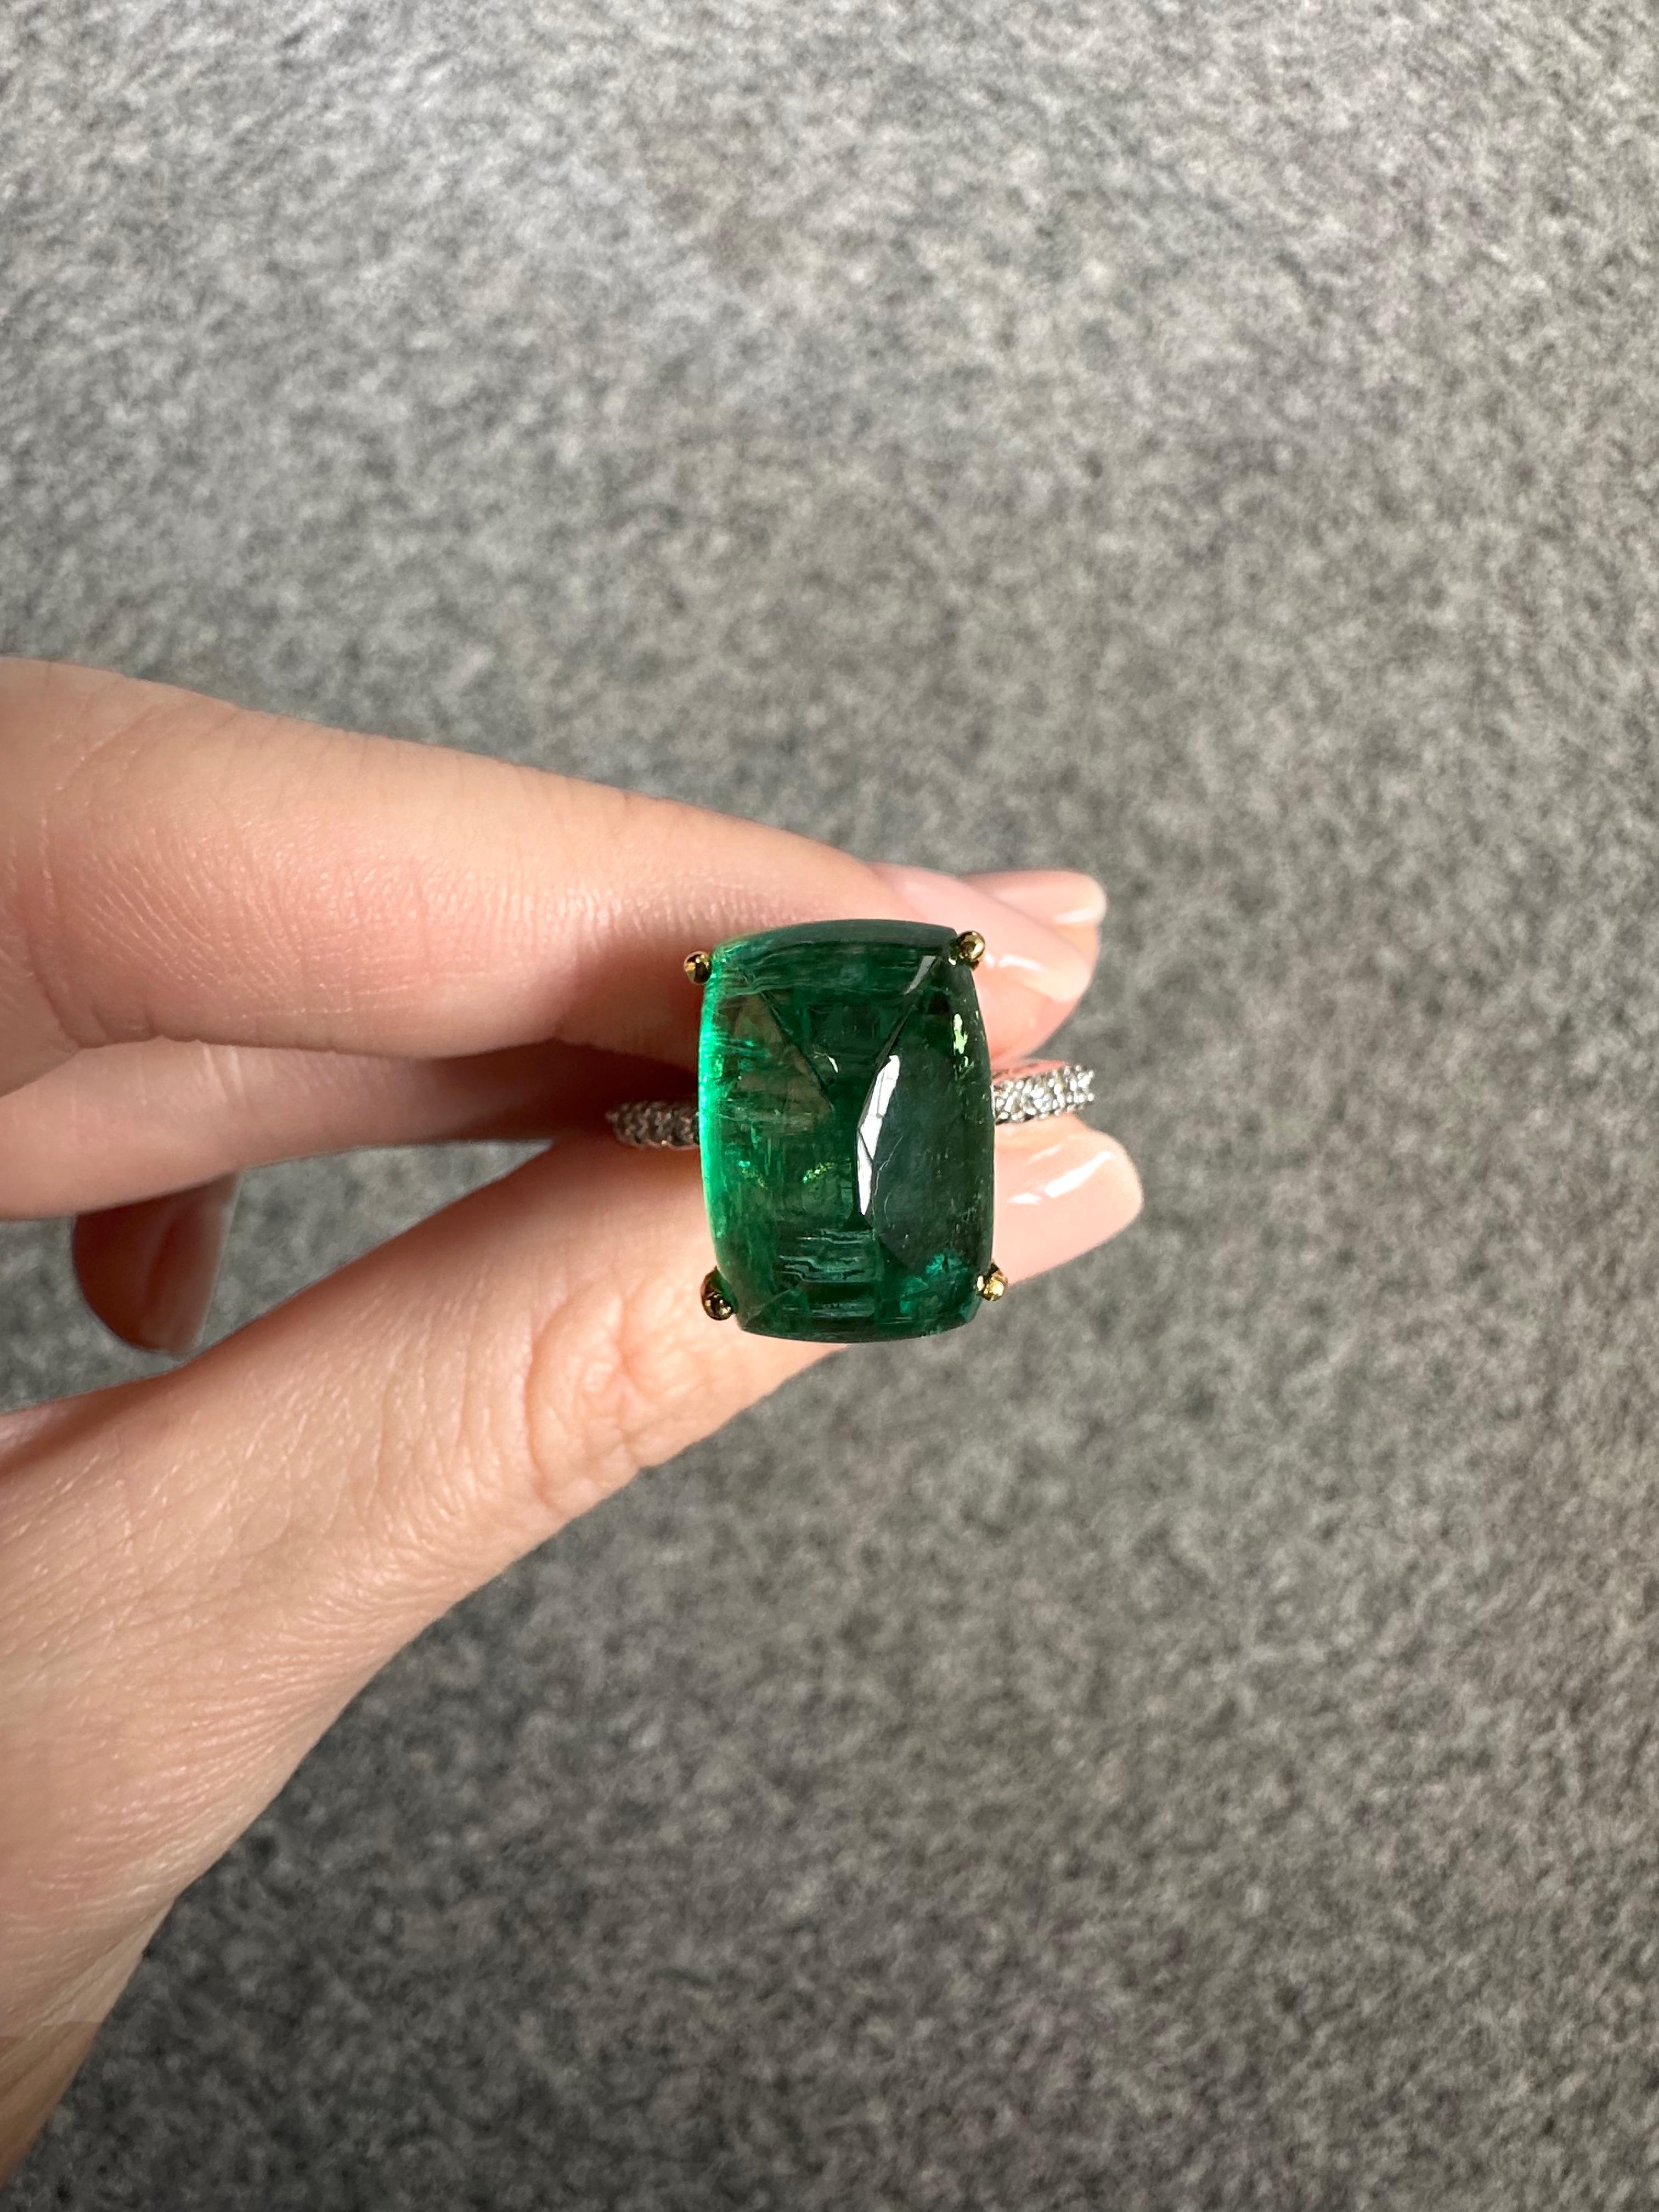 Make a statement with this stunning, certified, natural 13.40 carat Emerald sugarloaf shaped cocktail ring. The center piece is absolutely transparent, with a beautiful vivid green color. The ring is set in solid 18K white gold, and is sized